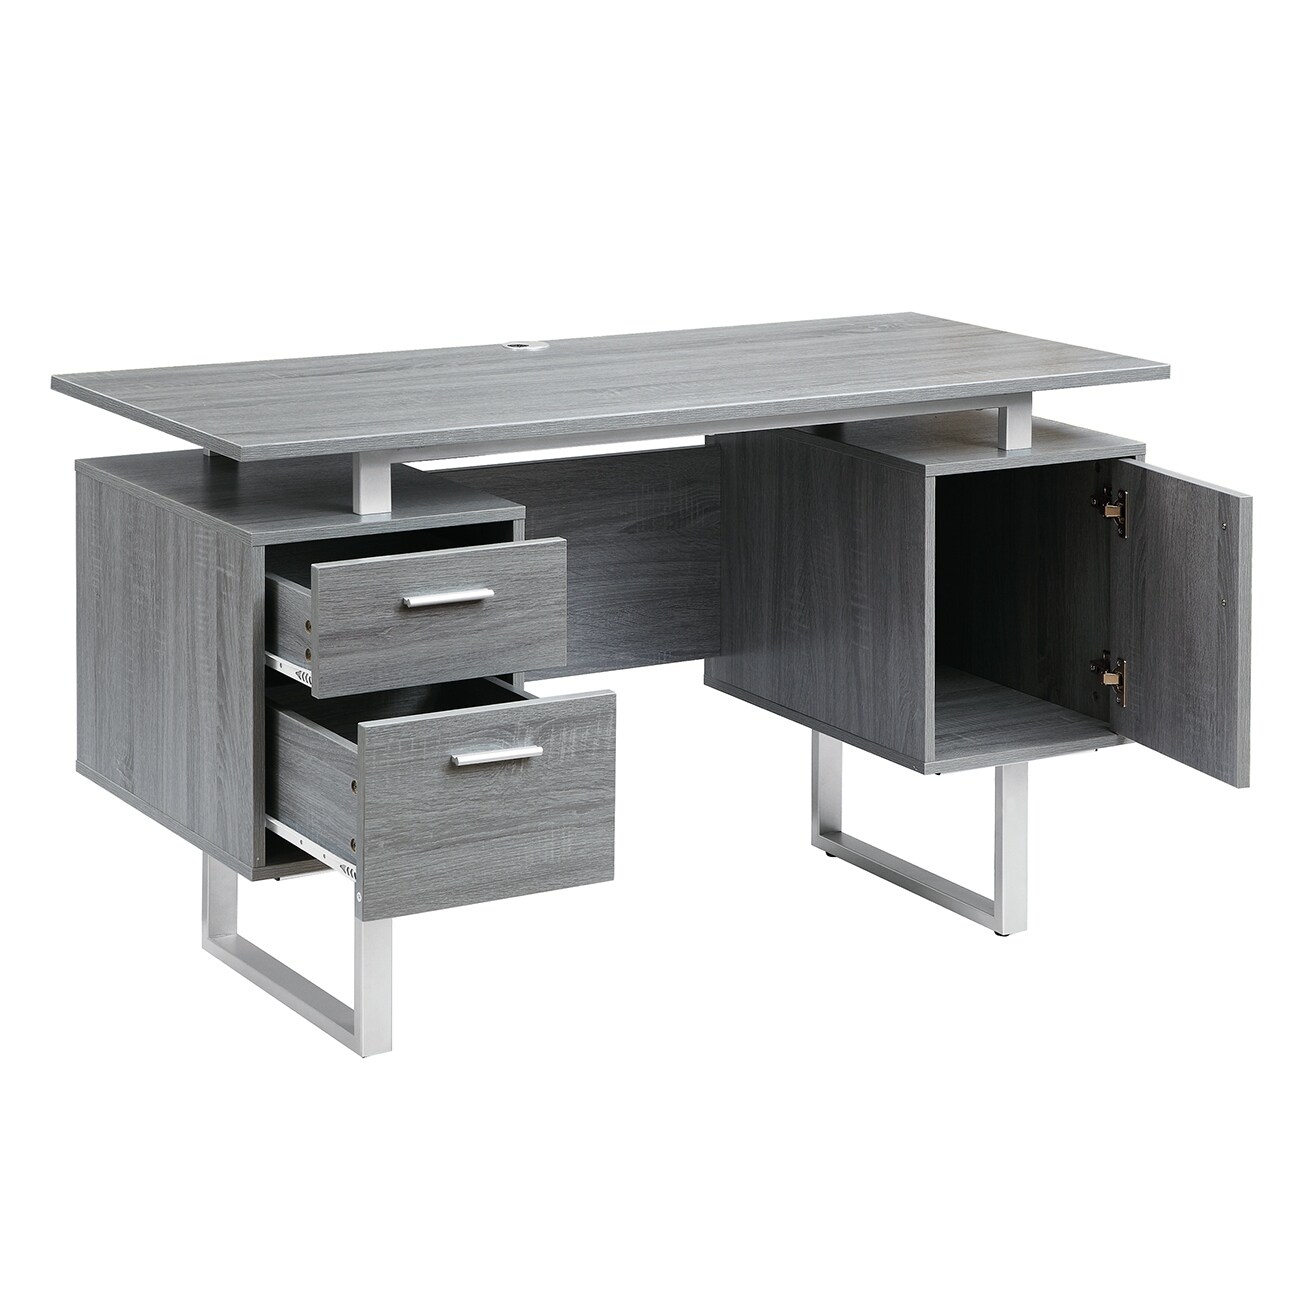 https://ak1.ostkcdn.com/images/products/is/images/direct/2599a5b1cc350fa1a6e2ac444af726f71c4af146/Modern-Office-Desk-With-2-Drawers-and-1-Cabinet-With-Handles%2CPlenty-of-Work-Space%2CSuitable-for-Home-Office-and-Business-Office.jpg